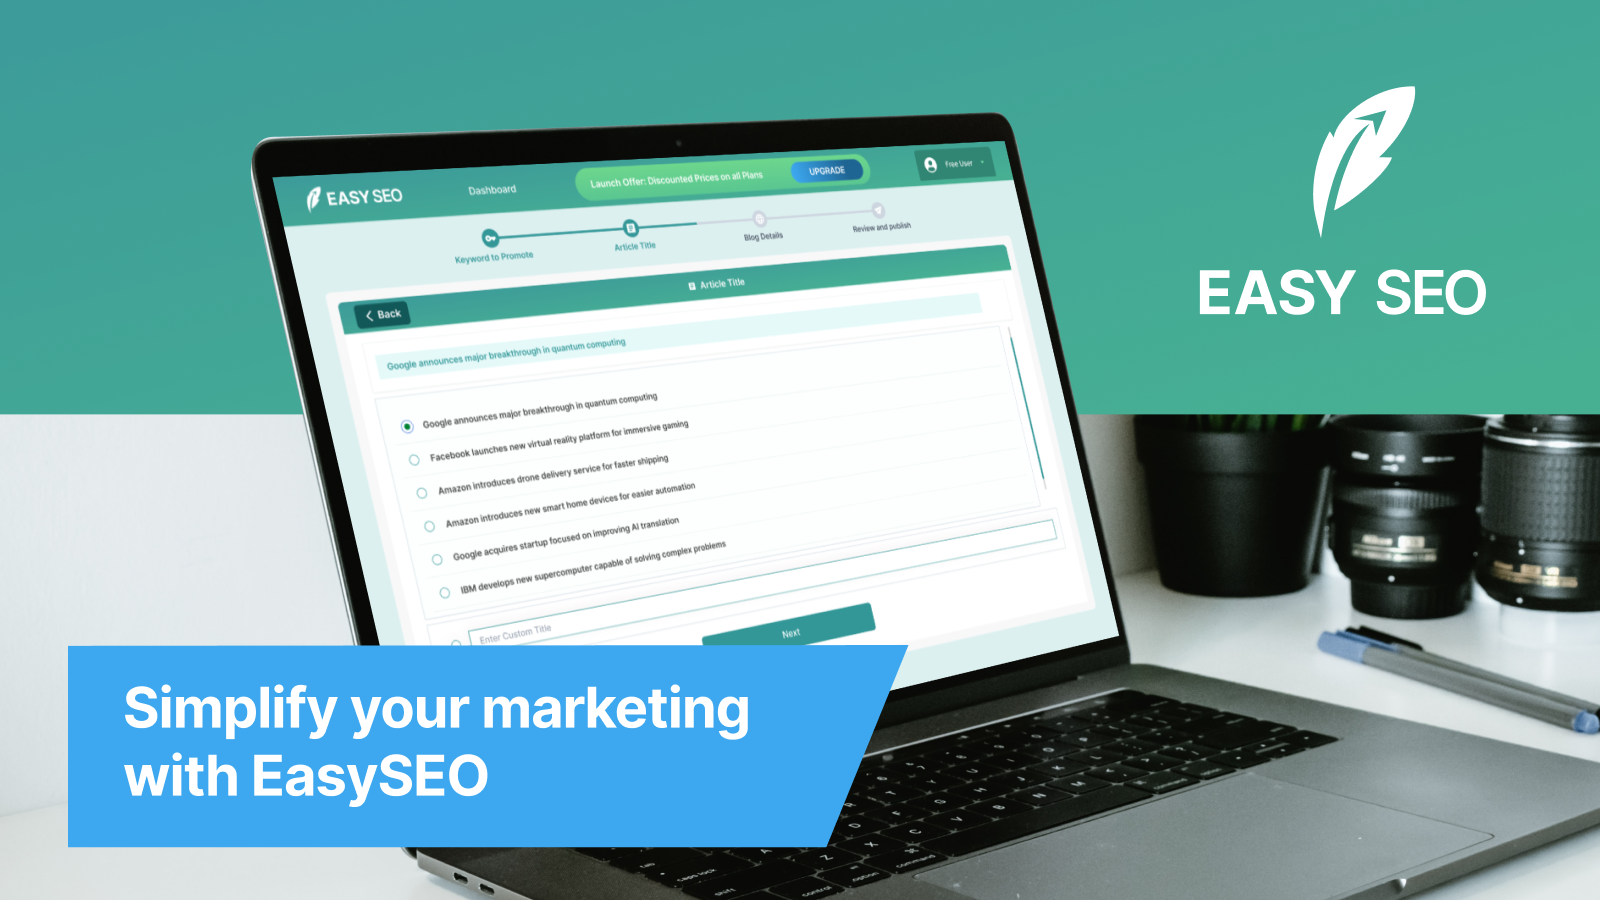 Simplify your Marketing with EasySEO